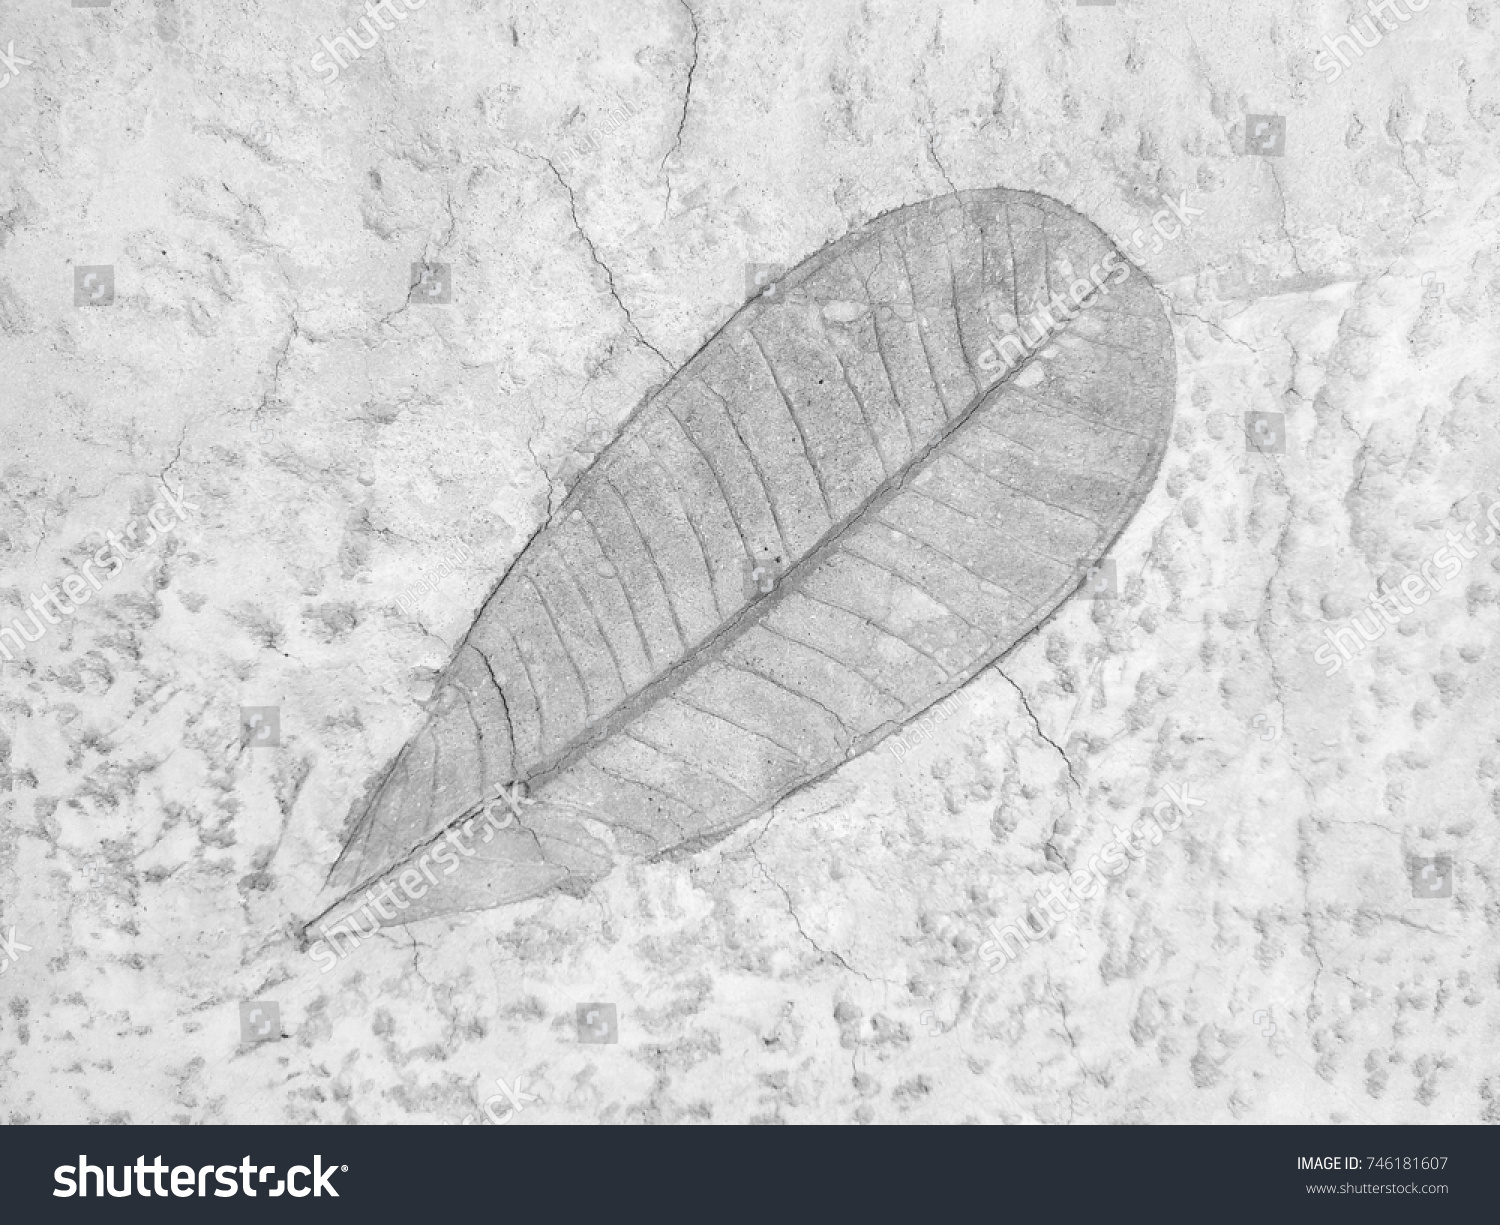 The leaf imprint on the cement floor background #746181607